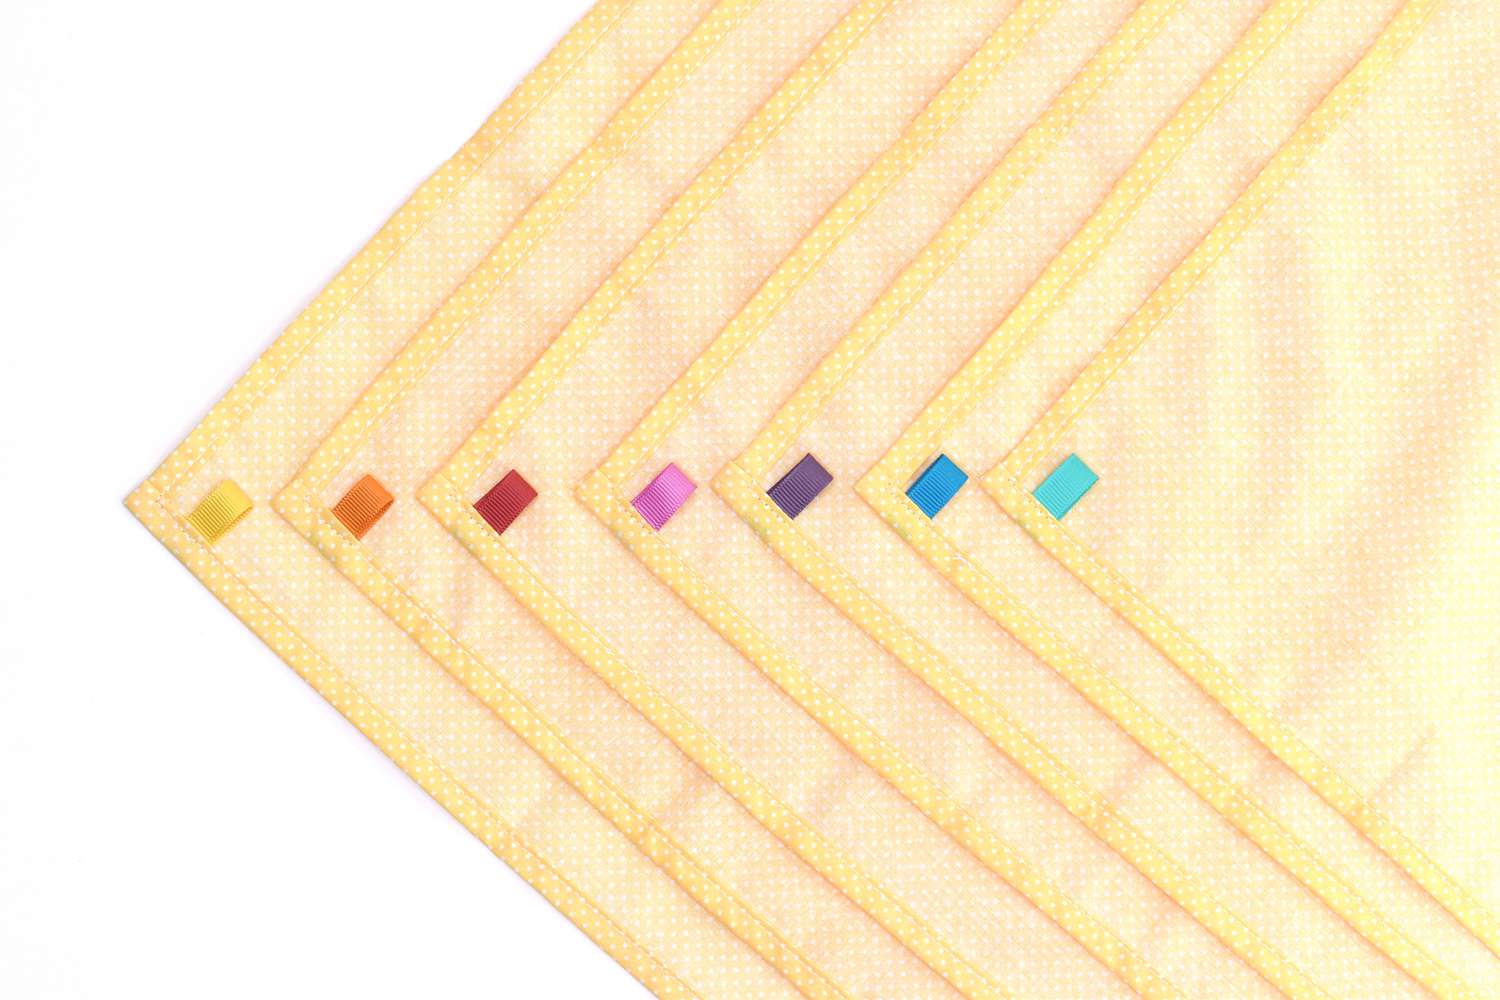 Add Color-Coded Ribbons to Each Cloth Napkin